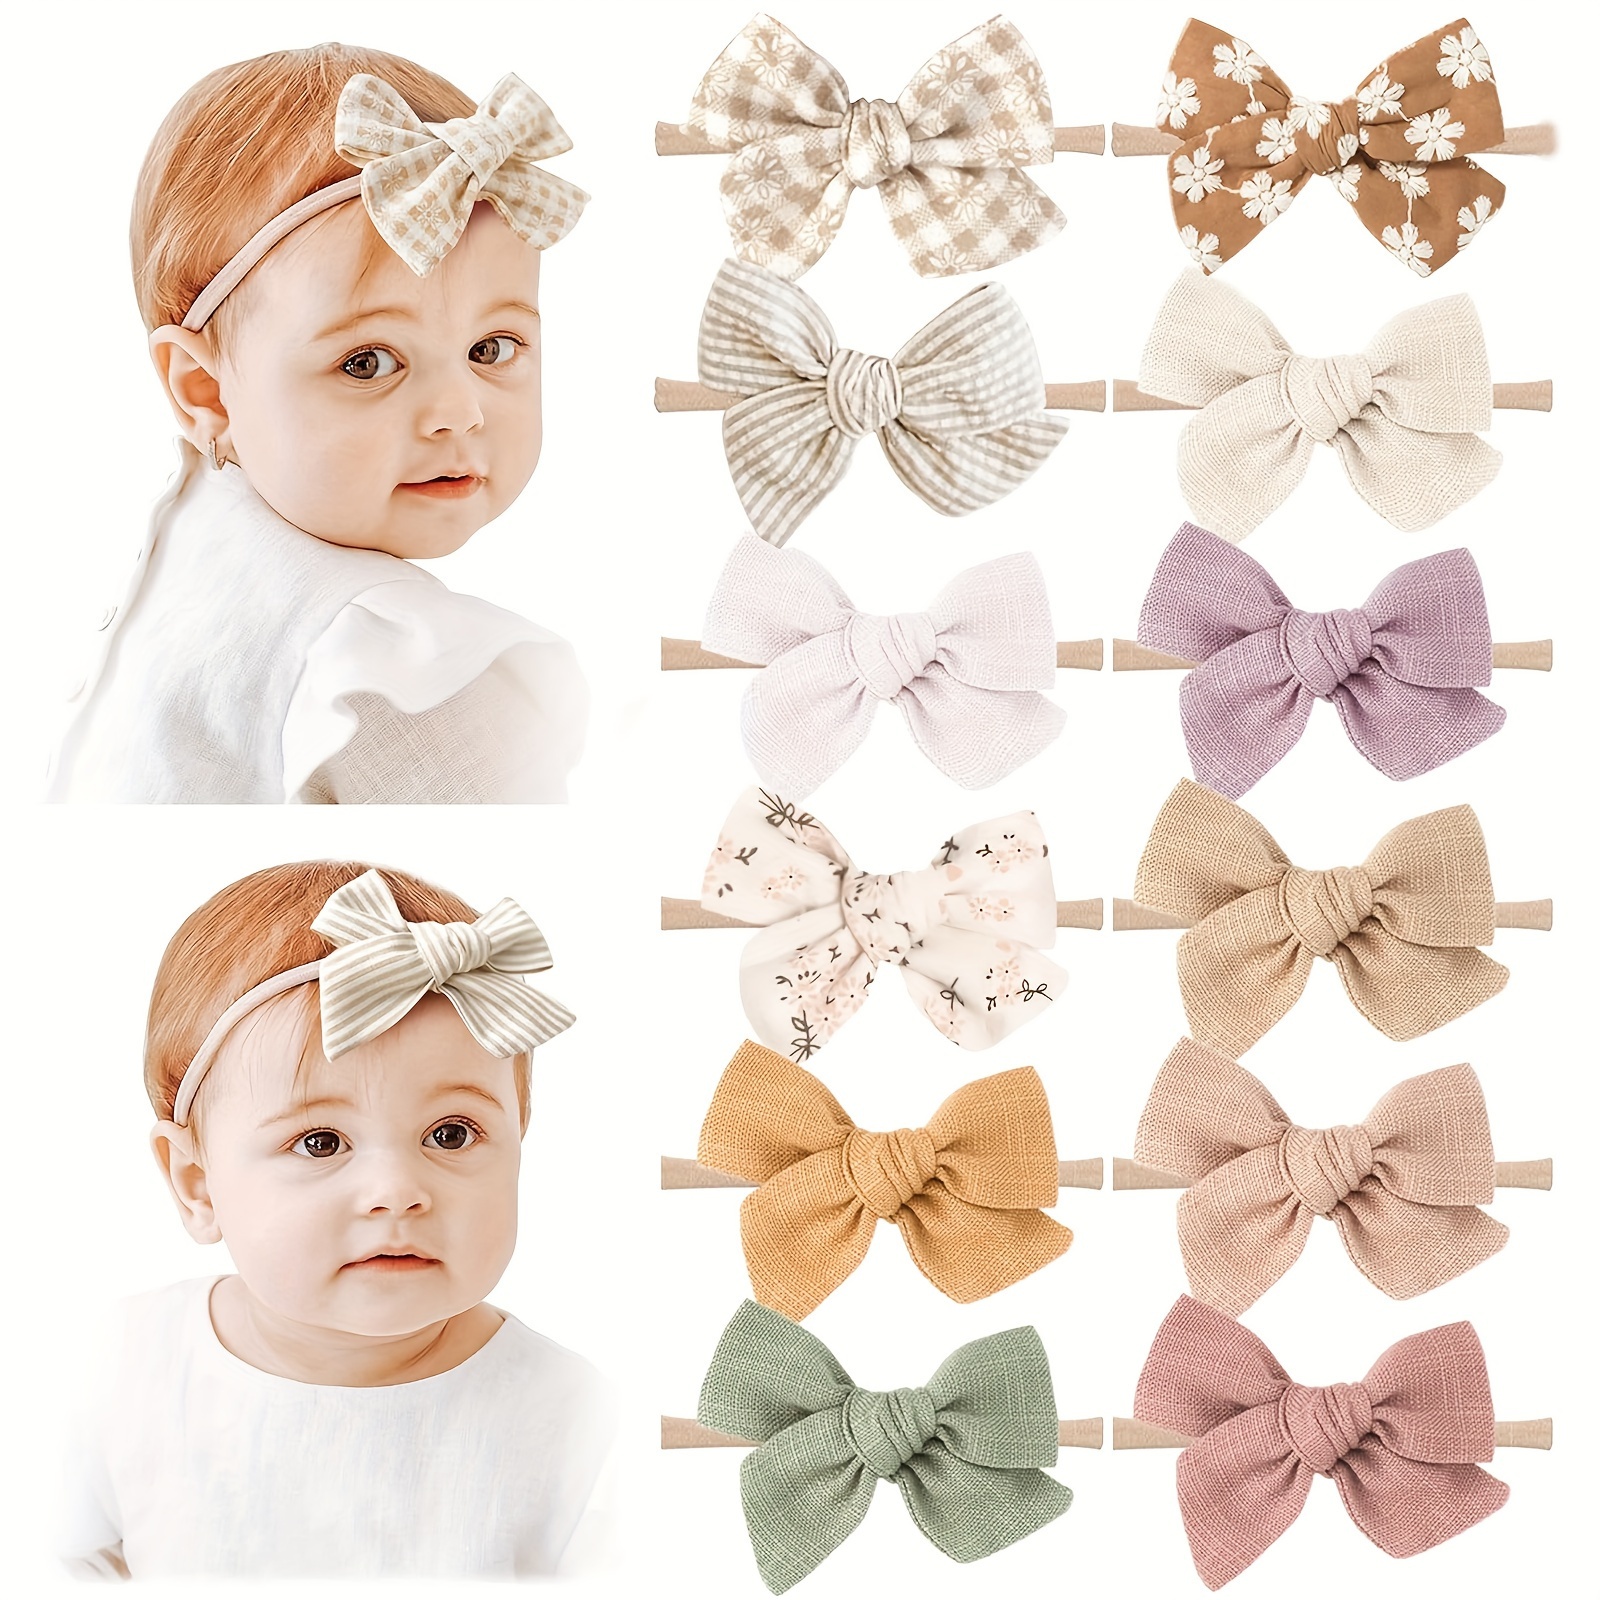 

12pcs Baby Girls Elastic Bows Hairbands For Newborns, Infants & Toddlers, Handmade Hair Accessories For Girls